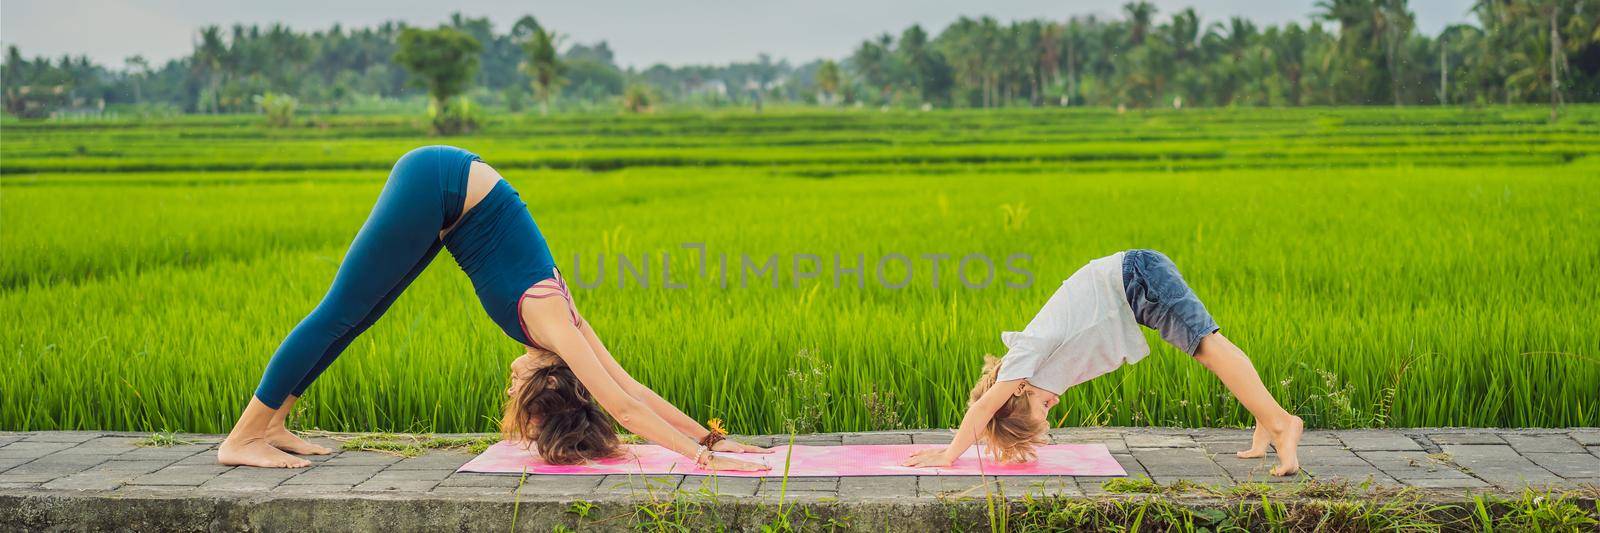 Boy and his yoga teacher doing yoga in a rice field. BANNER, LONG FORMAT